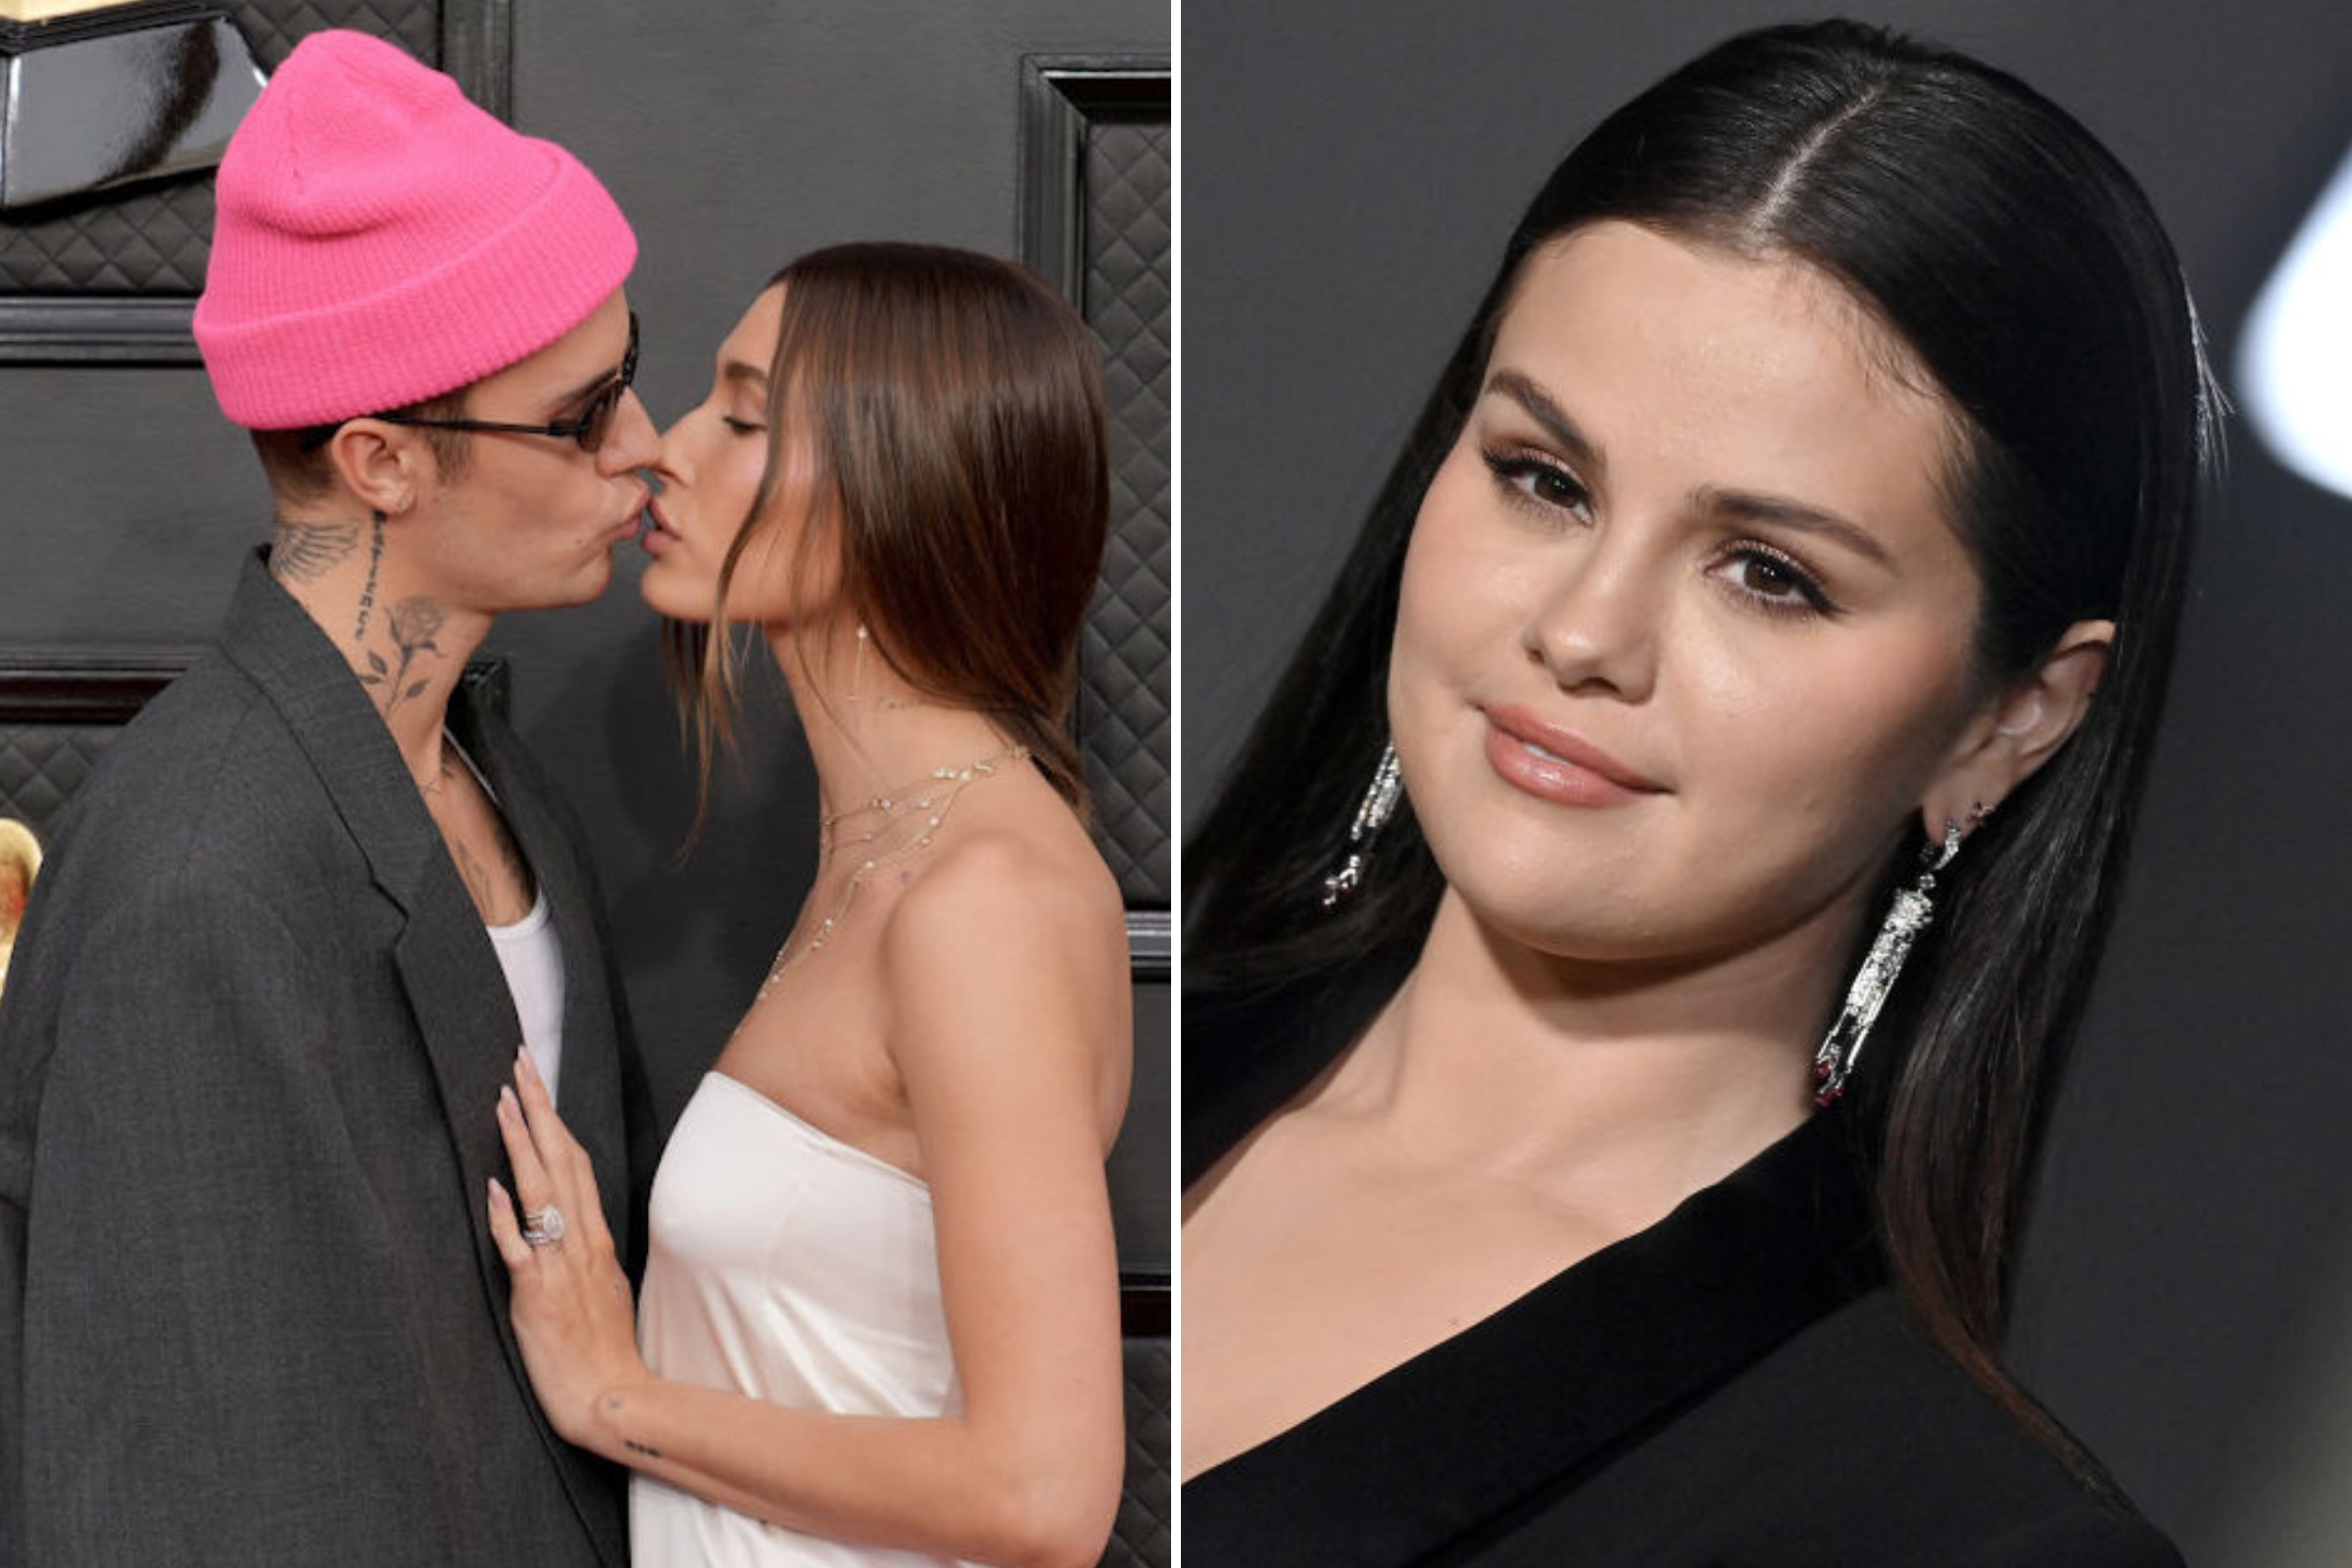 What Hailey Bieber and Selena Gomez Said About Each Other Before Shock Photo